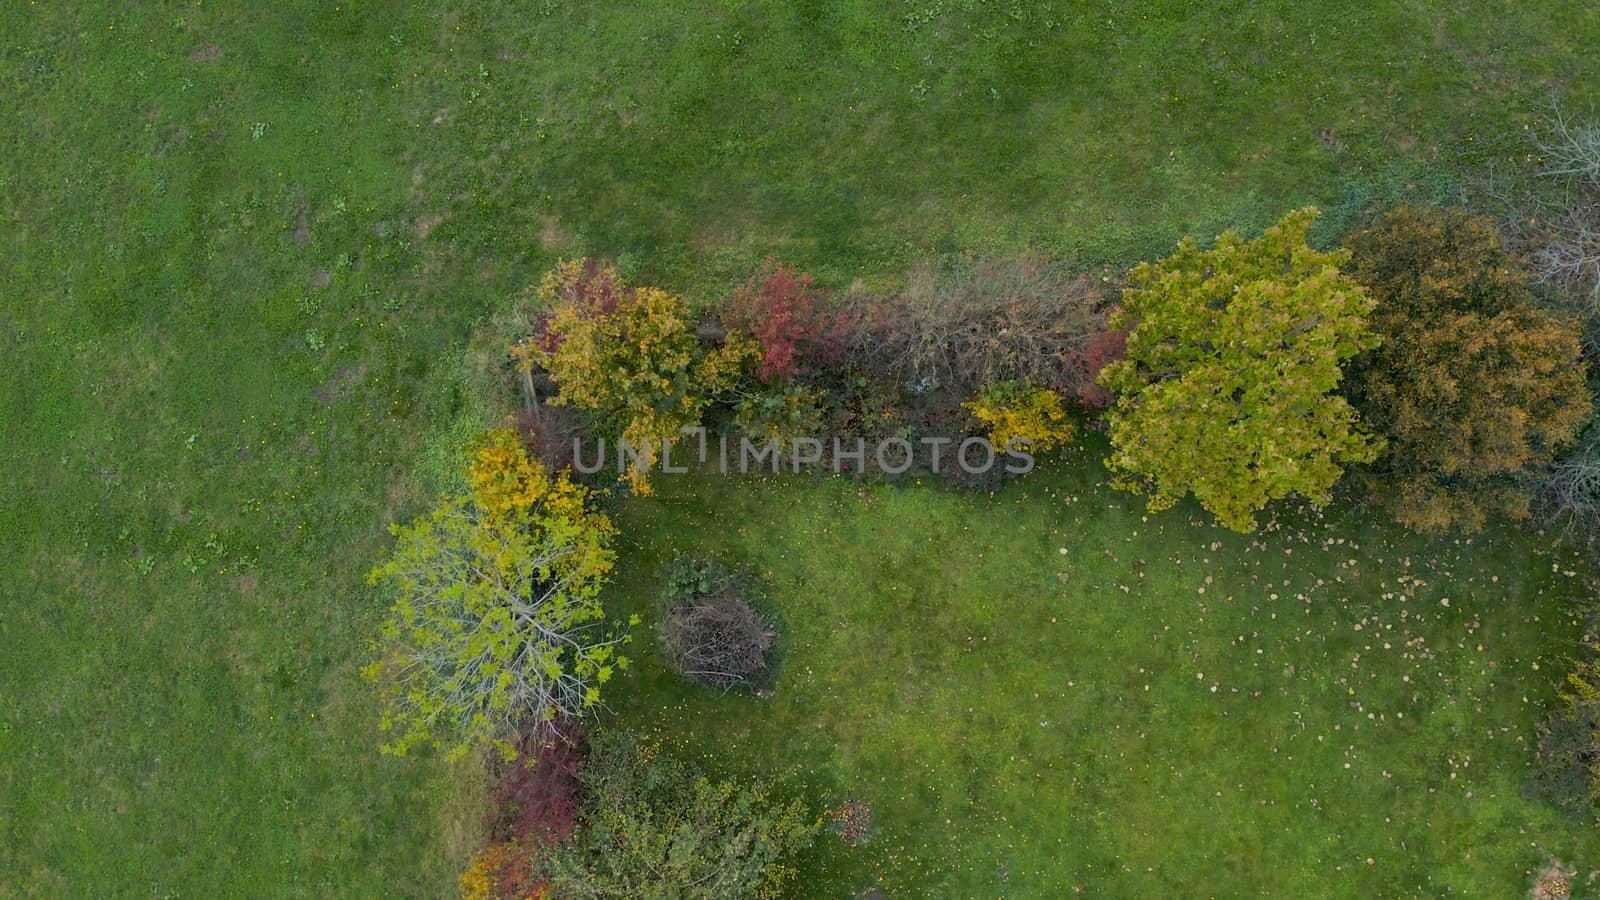 Top down aerial view of garden fence overgrown with bushes and trees, autumn foliage, green meadow, nobody, home gardening, colorful foliage